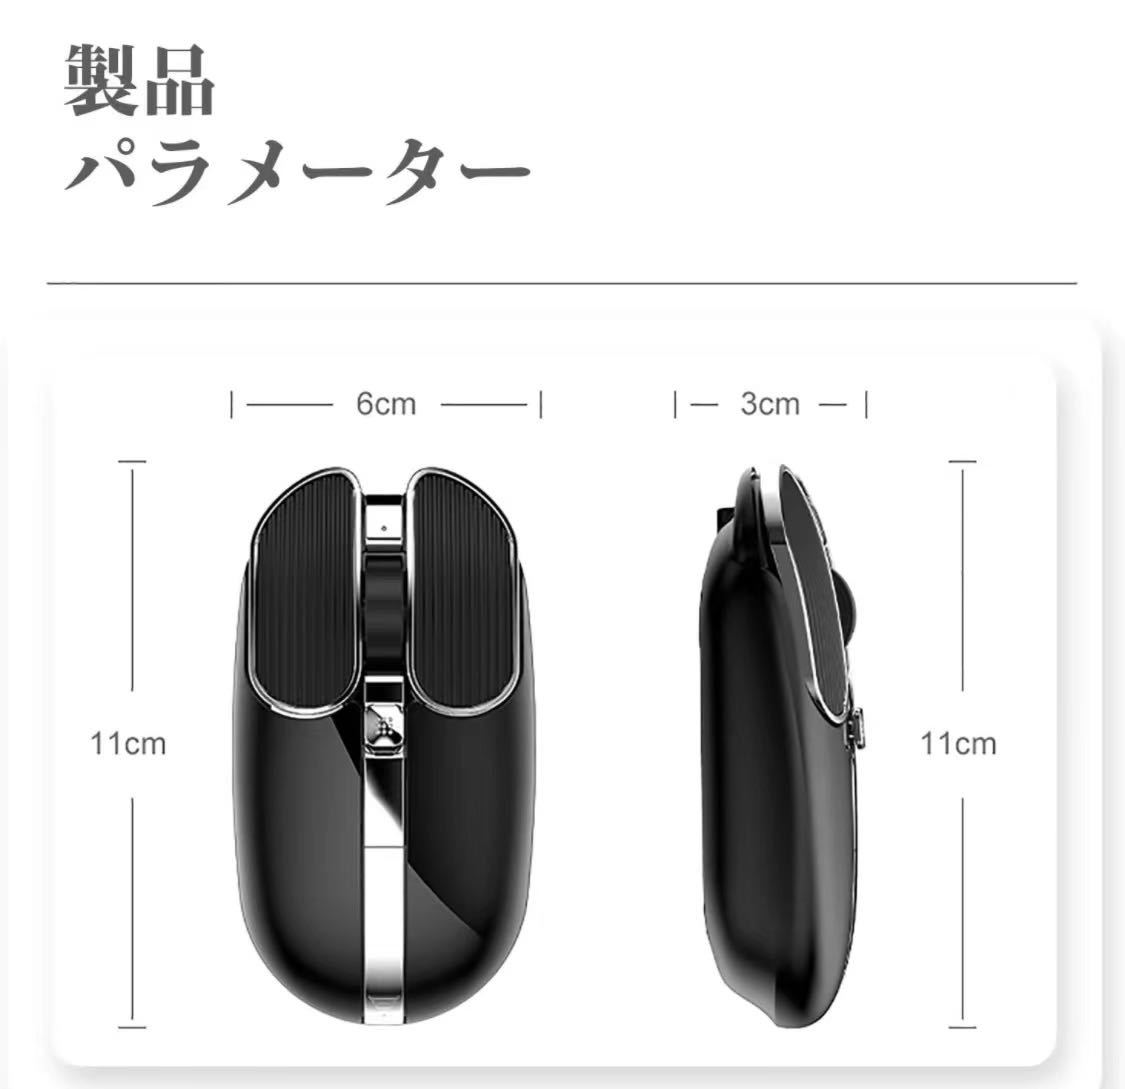  wireless mouse pixart3065 wireless 8 button 3200DPI rechargeable 